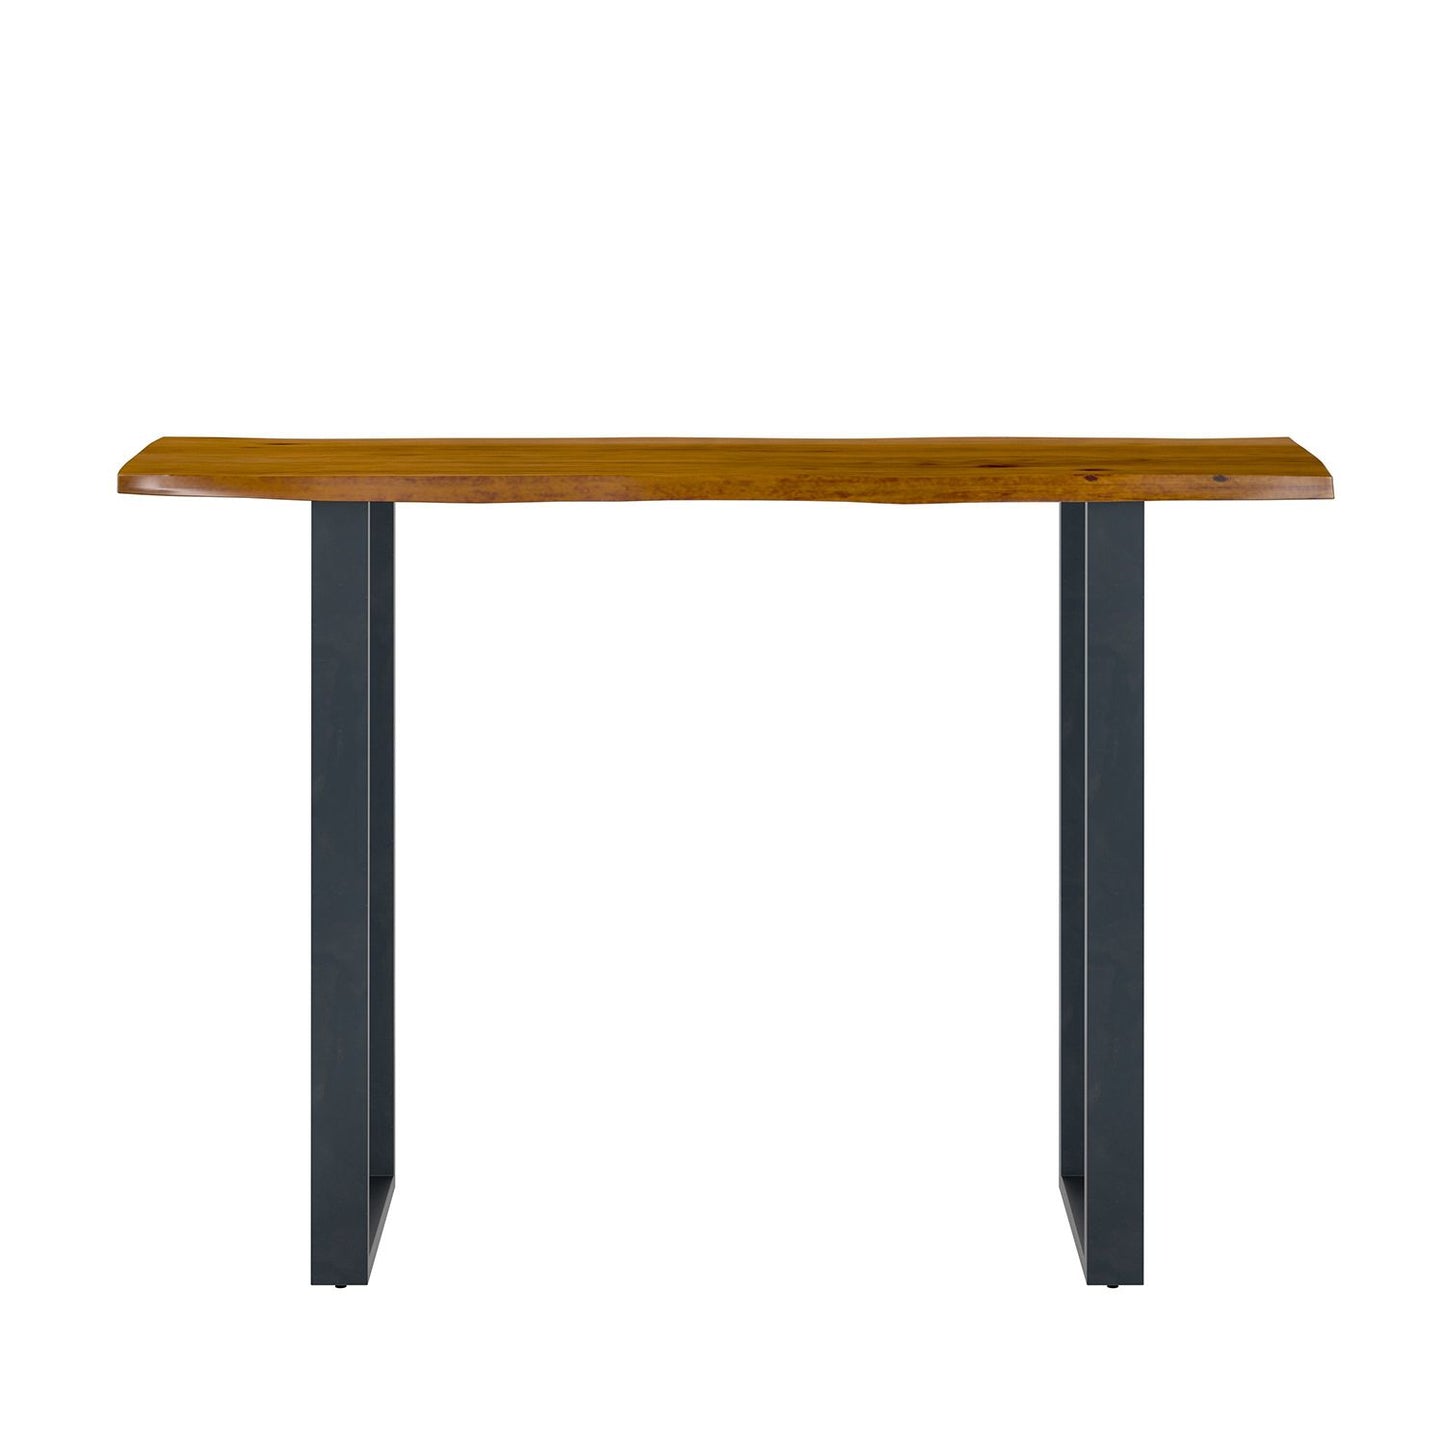 Hoxton Russet Console Table